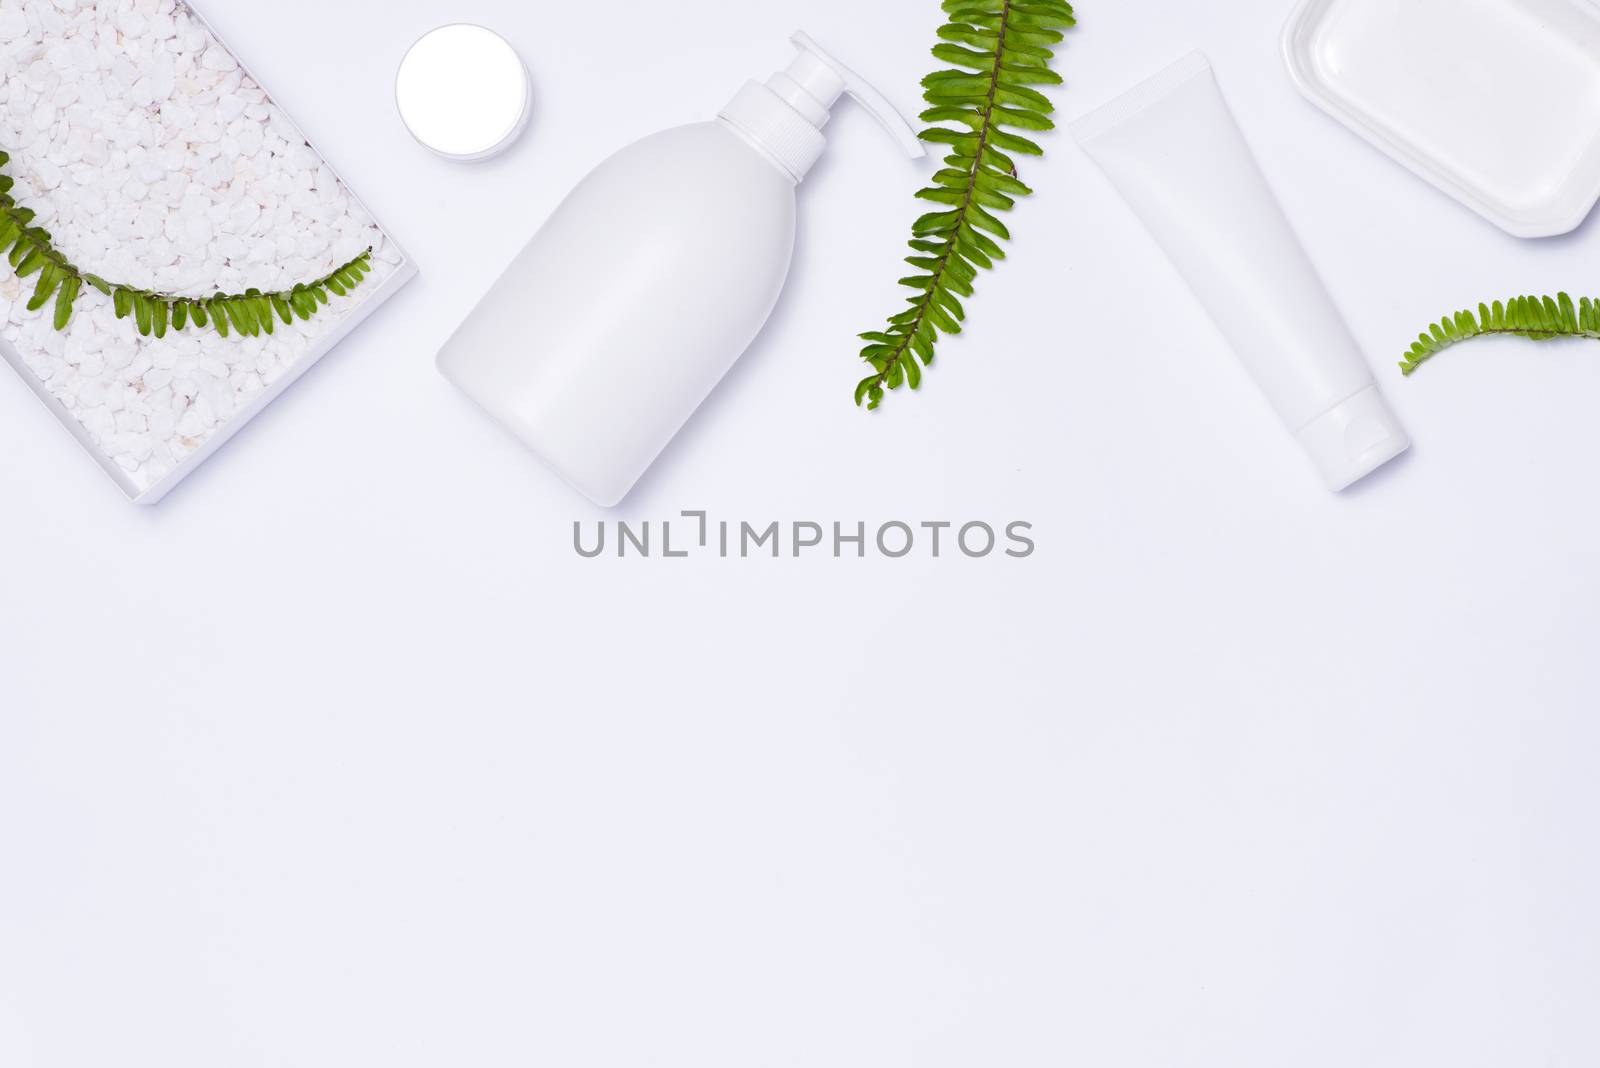 Cosmetics SPA branding mock-up, top view, on white background. by makidotvn